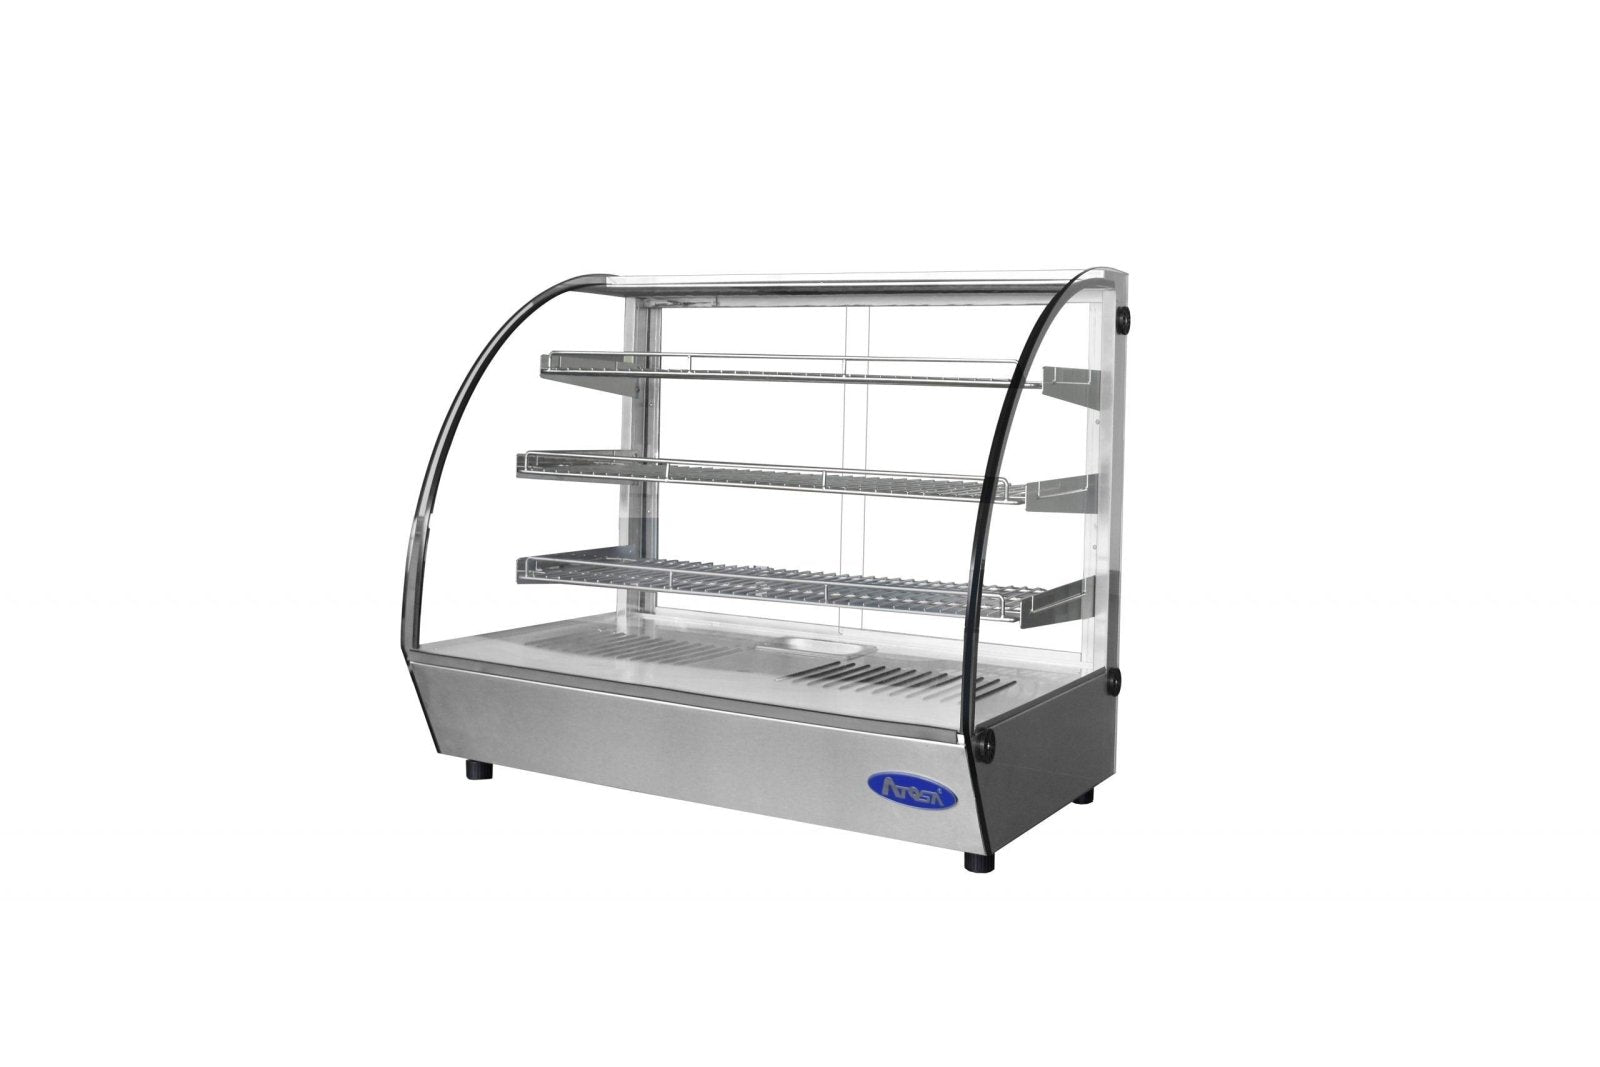 Atosa CHDC-44 Countertop Heated Curved Display Case, 4.4 cu ft, 3 Stainless Steel Shelves - TheChefStore.Com